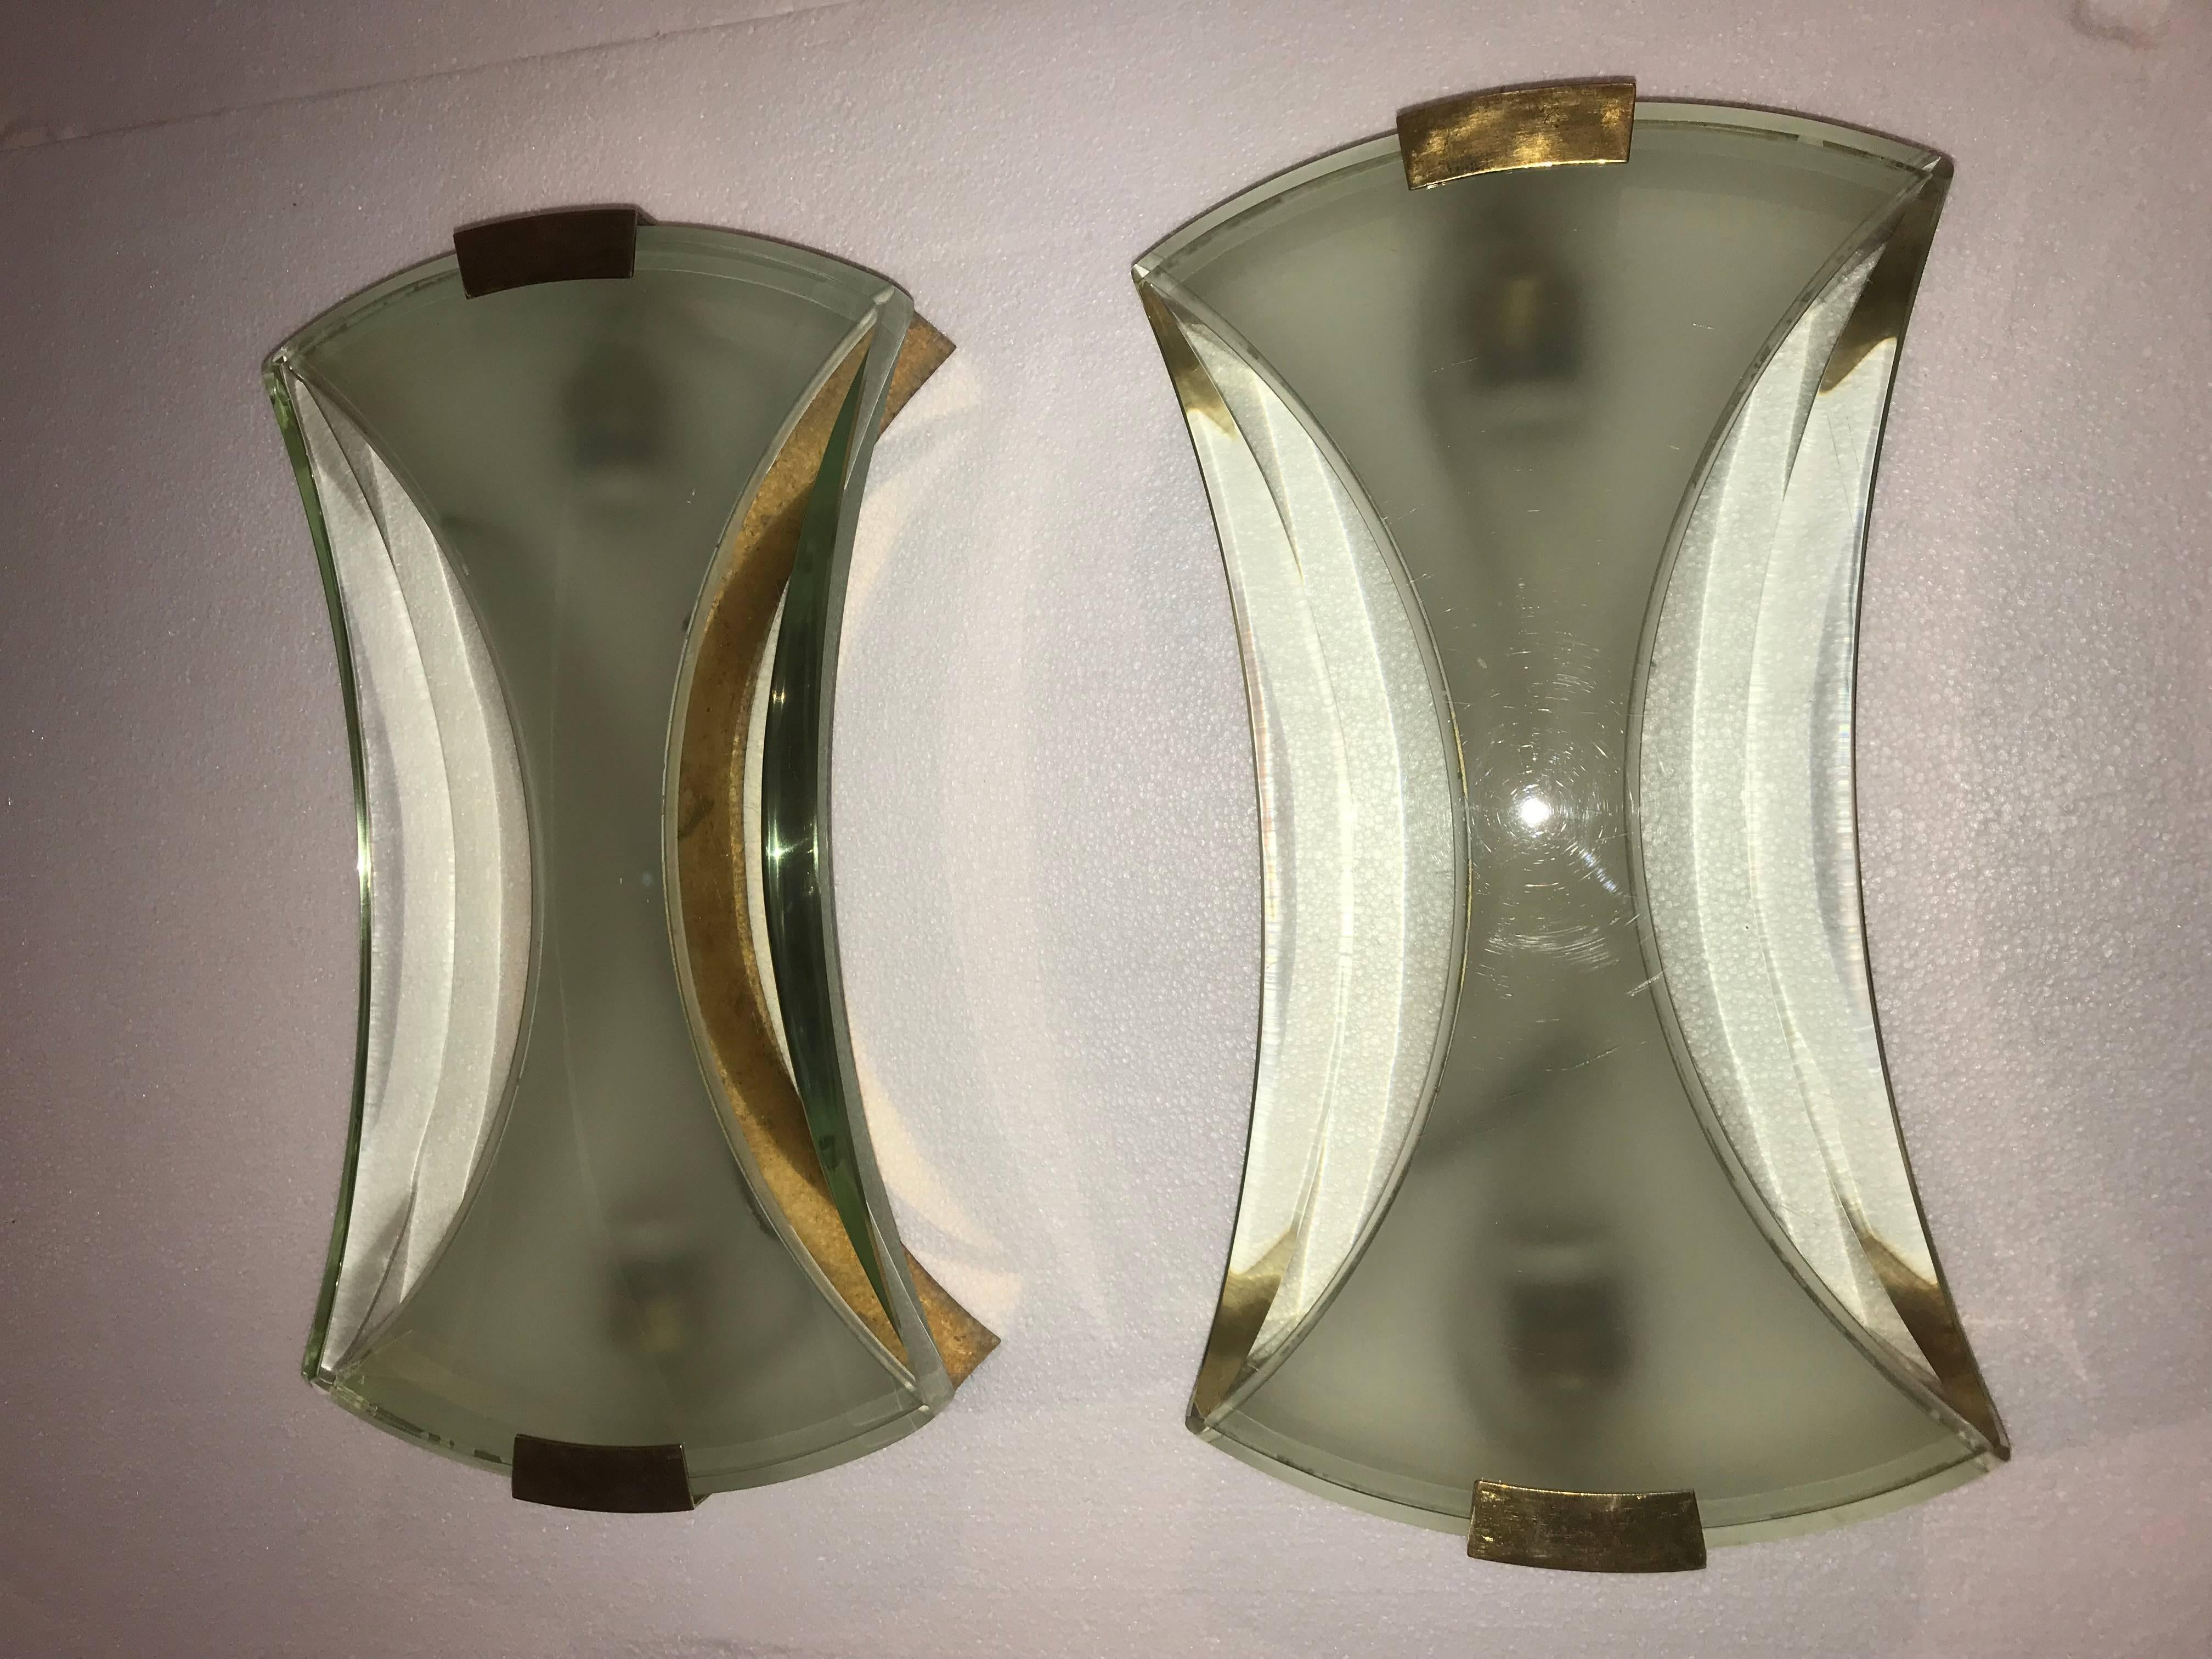 Mid-Century Modern sconces by Max Ingrand for Fontana Arte, in brass and cut  glass.
They are in great original vintage condition.
